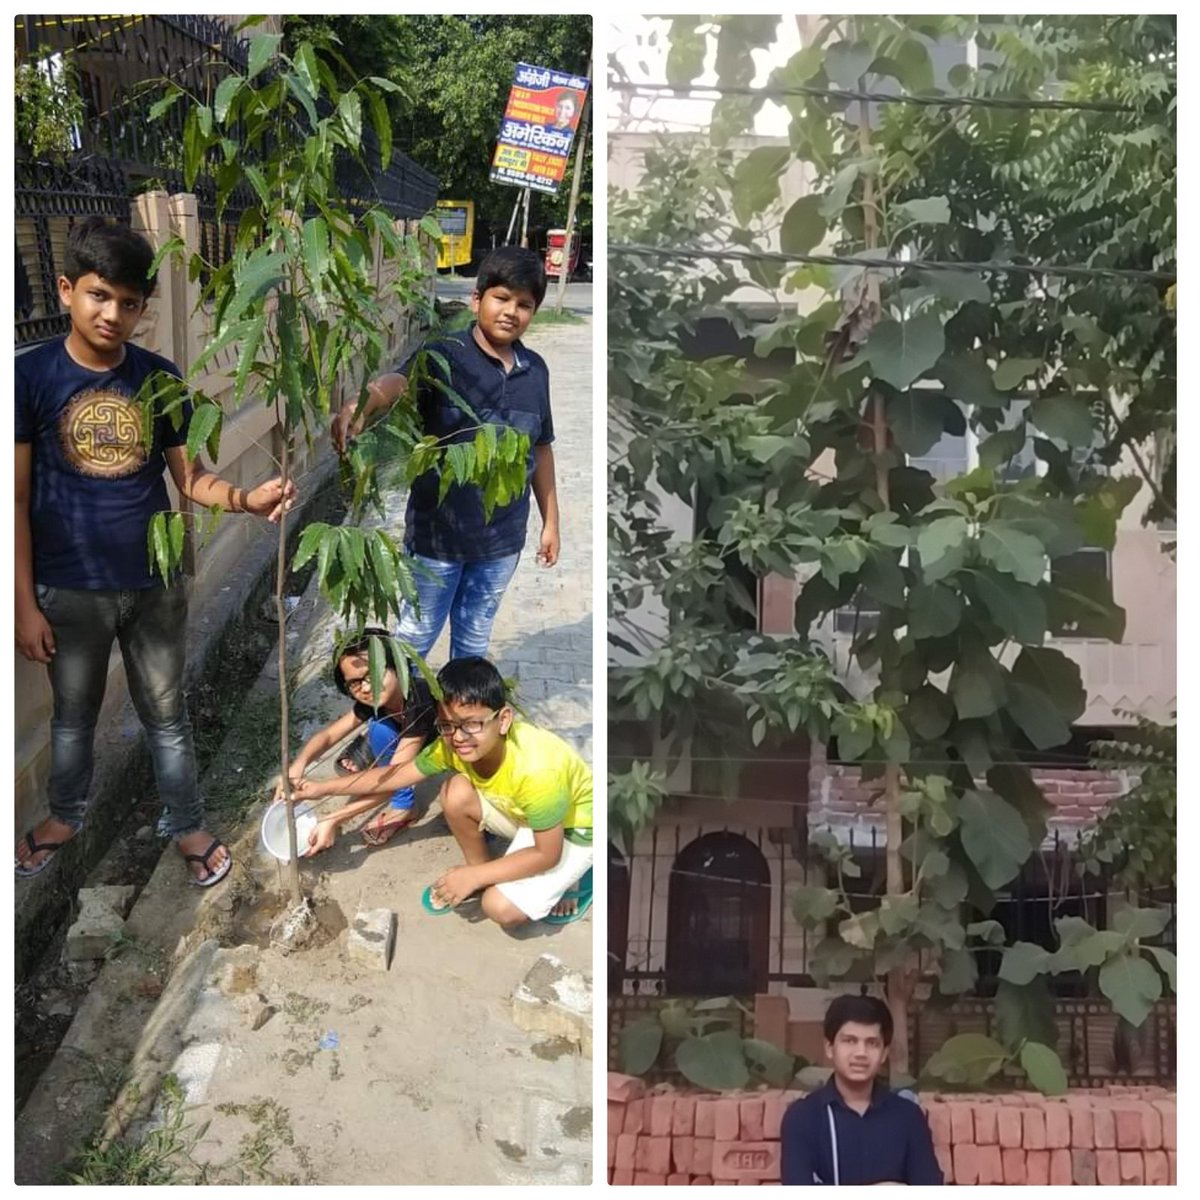 THEN and NOW..By lord Shri Krishna's grace..Sita Ashok(ltr replaced with teak)(1677)planted  on12/6/19  #onetreeeverydaysaveearthcampaign #fightclimatechange #afforestation #carbonsequestration #BeatAirPollution #oneearth #PlantTreesPlantHope #KingdomAnimaliaTrust #climateaction